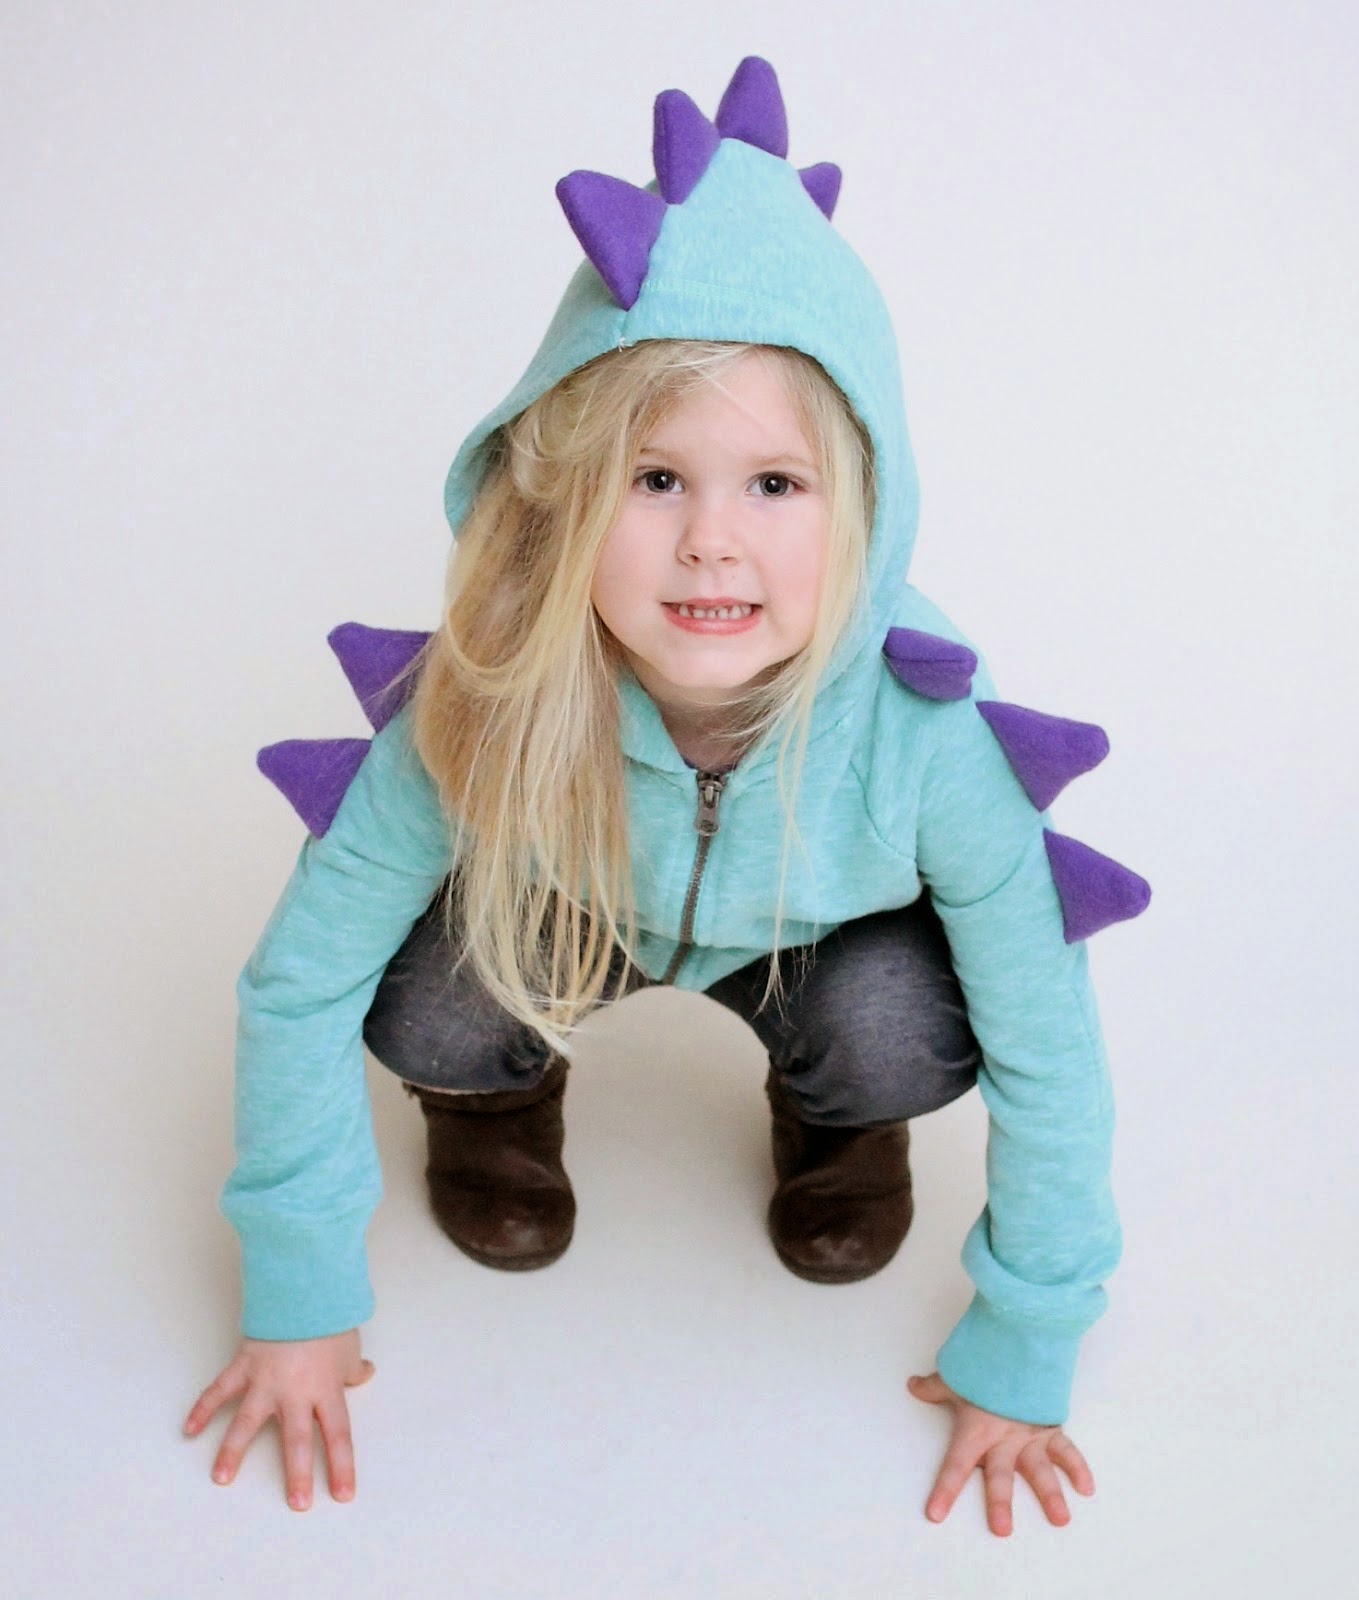 http://www.welcometothemousehouse.com/2014/04/how-to-make-dinosaur-hoodie-calling-all.html